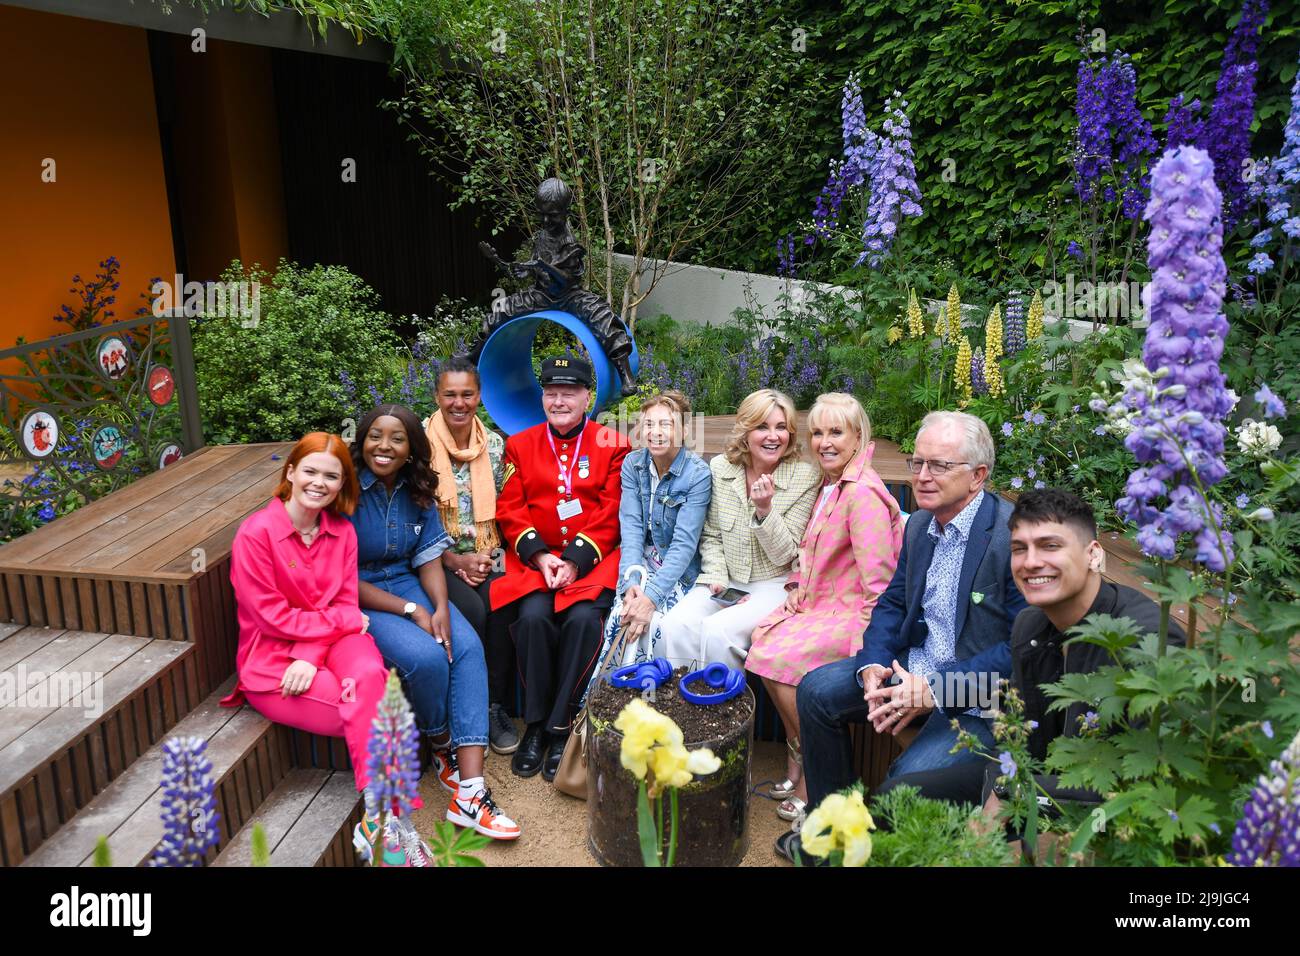 Chelsea Flower Show is back after three years due to the pandemic. It looks fantastic with all the gardens and flower displays. A floral feast for the eyes. These photos were taken during the press day. Photo : Blue Peter Presenters - Valerie Singleton, Anthea Turner, Tim Vincent, Janet Ellis, Lindsey Russell, Katie Mill, Sarah Greene Stock Photo